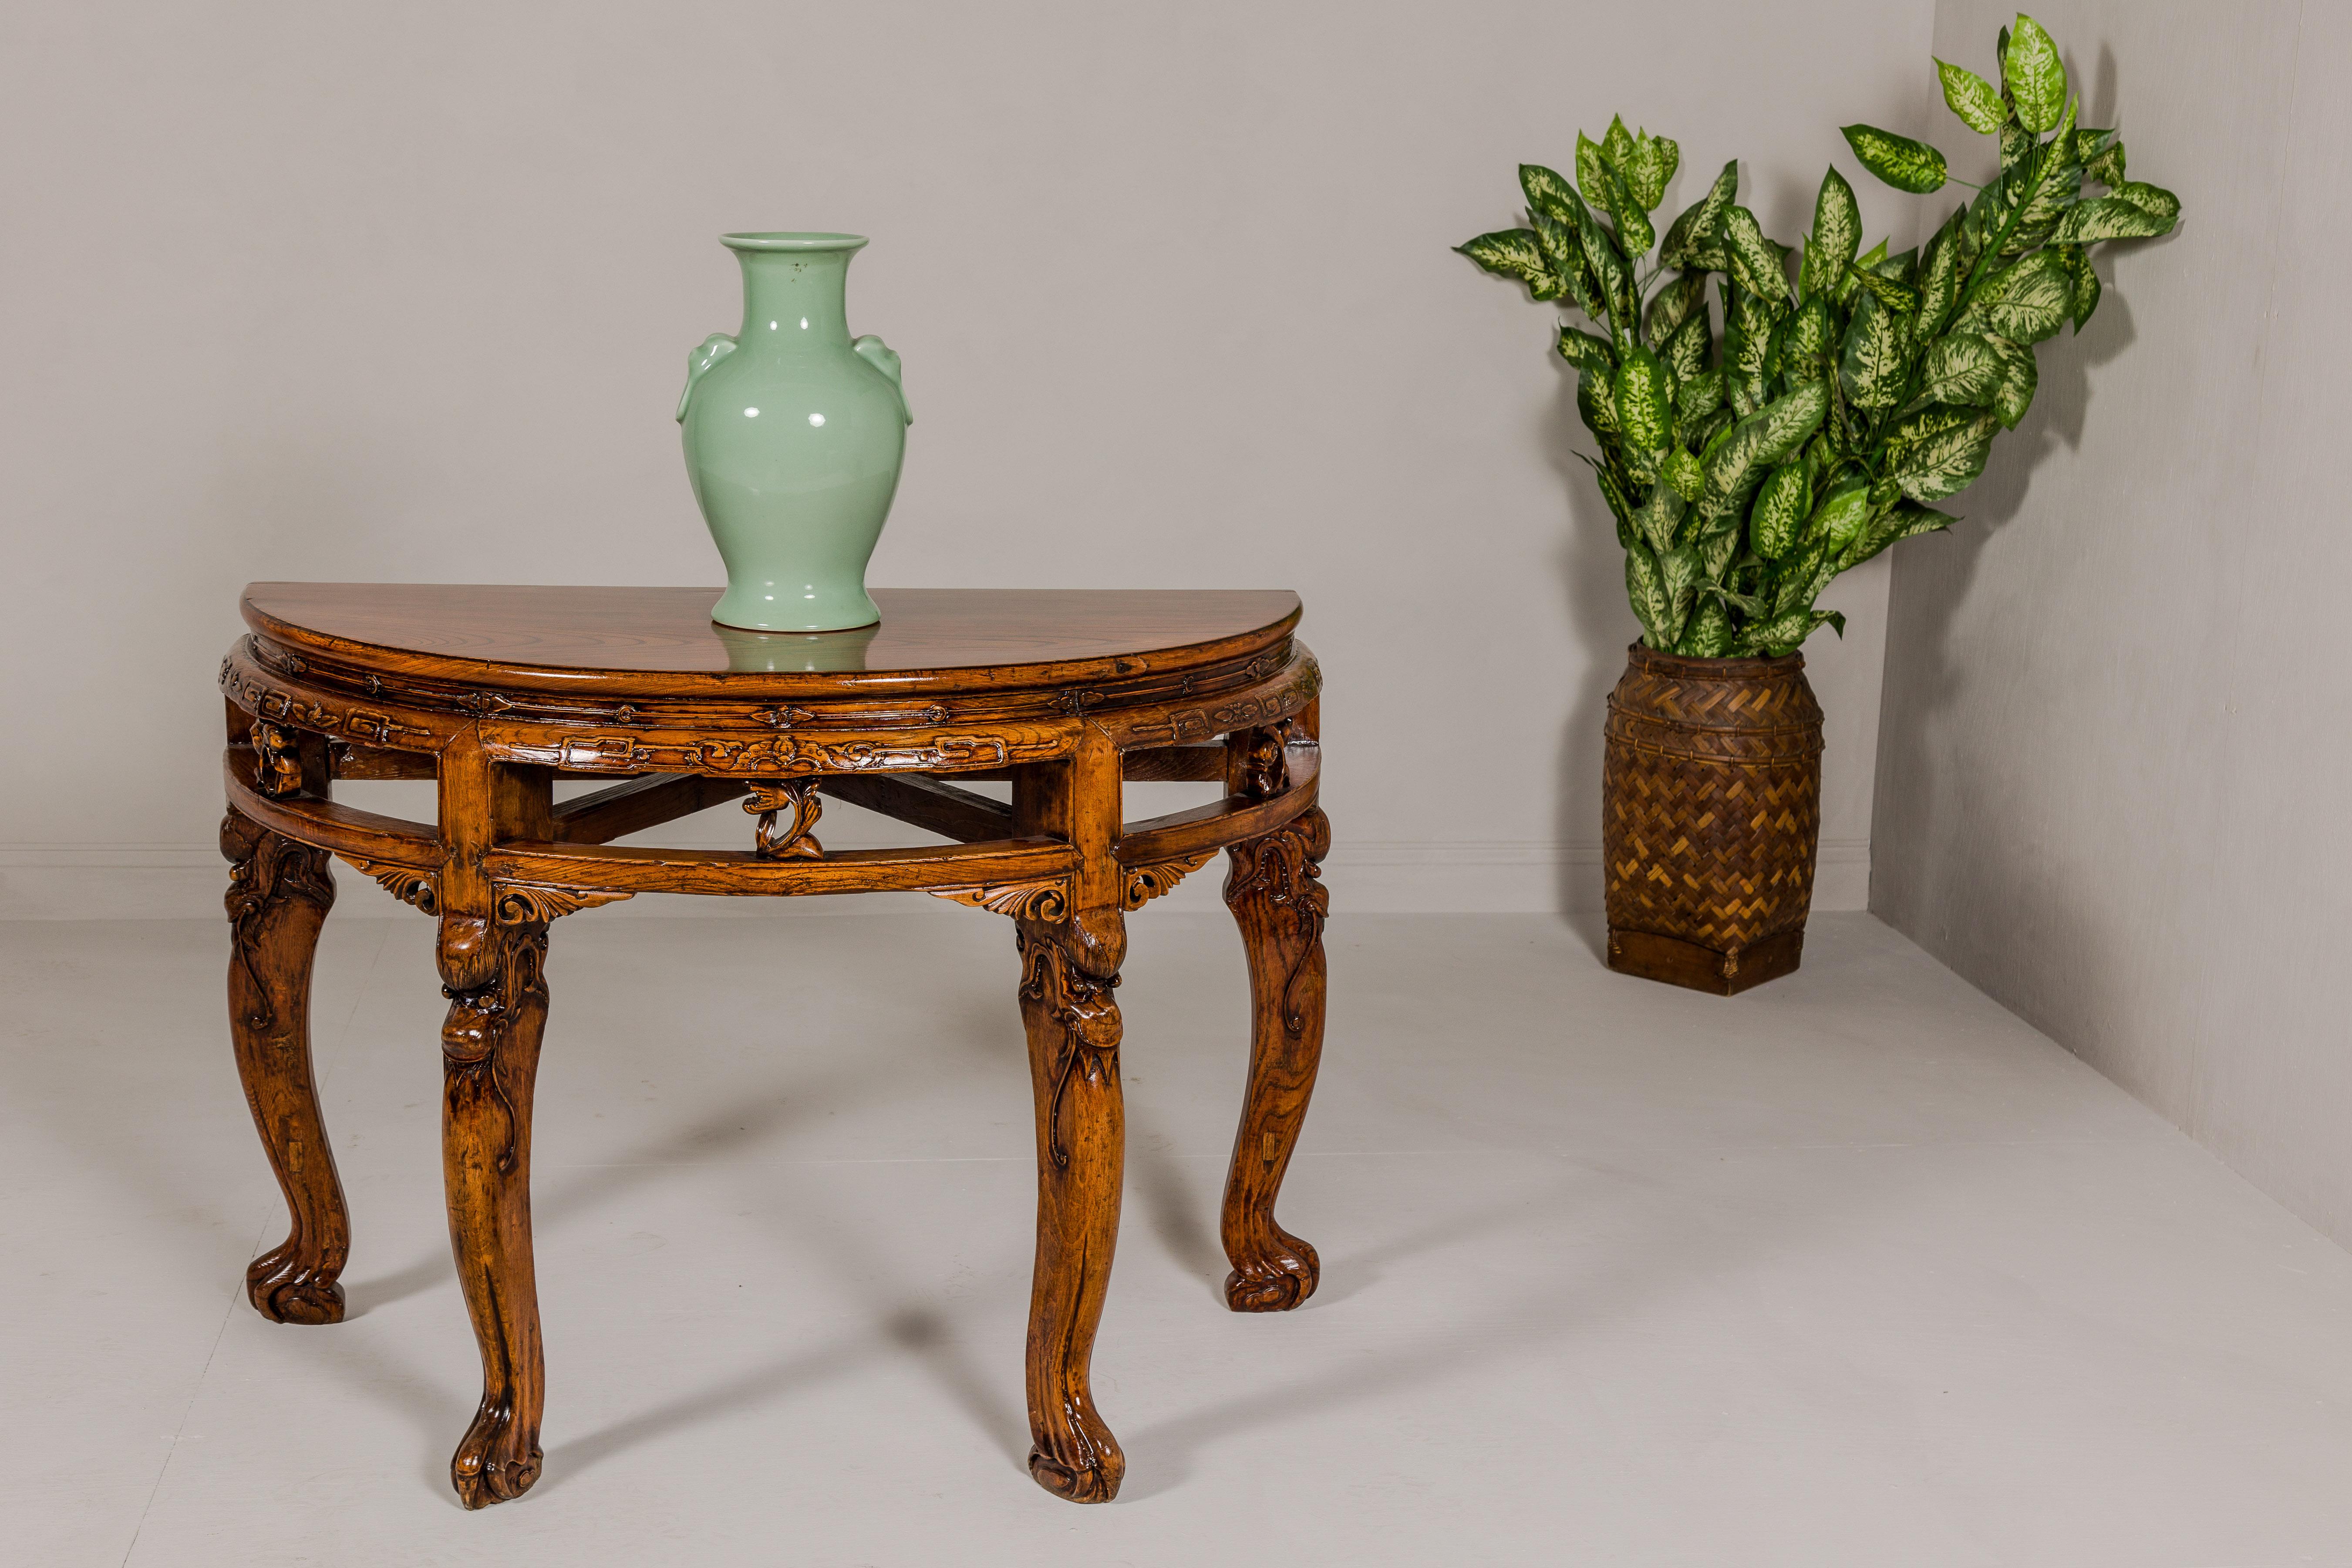 A Qing Dynasty period wooden demilune table from the 19th century with carved apron and mythical creatures on the legs. This Qing Dynasty period wooden demilune table, hailing from the 19th century, is a magnificent testament to the rich cultural